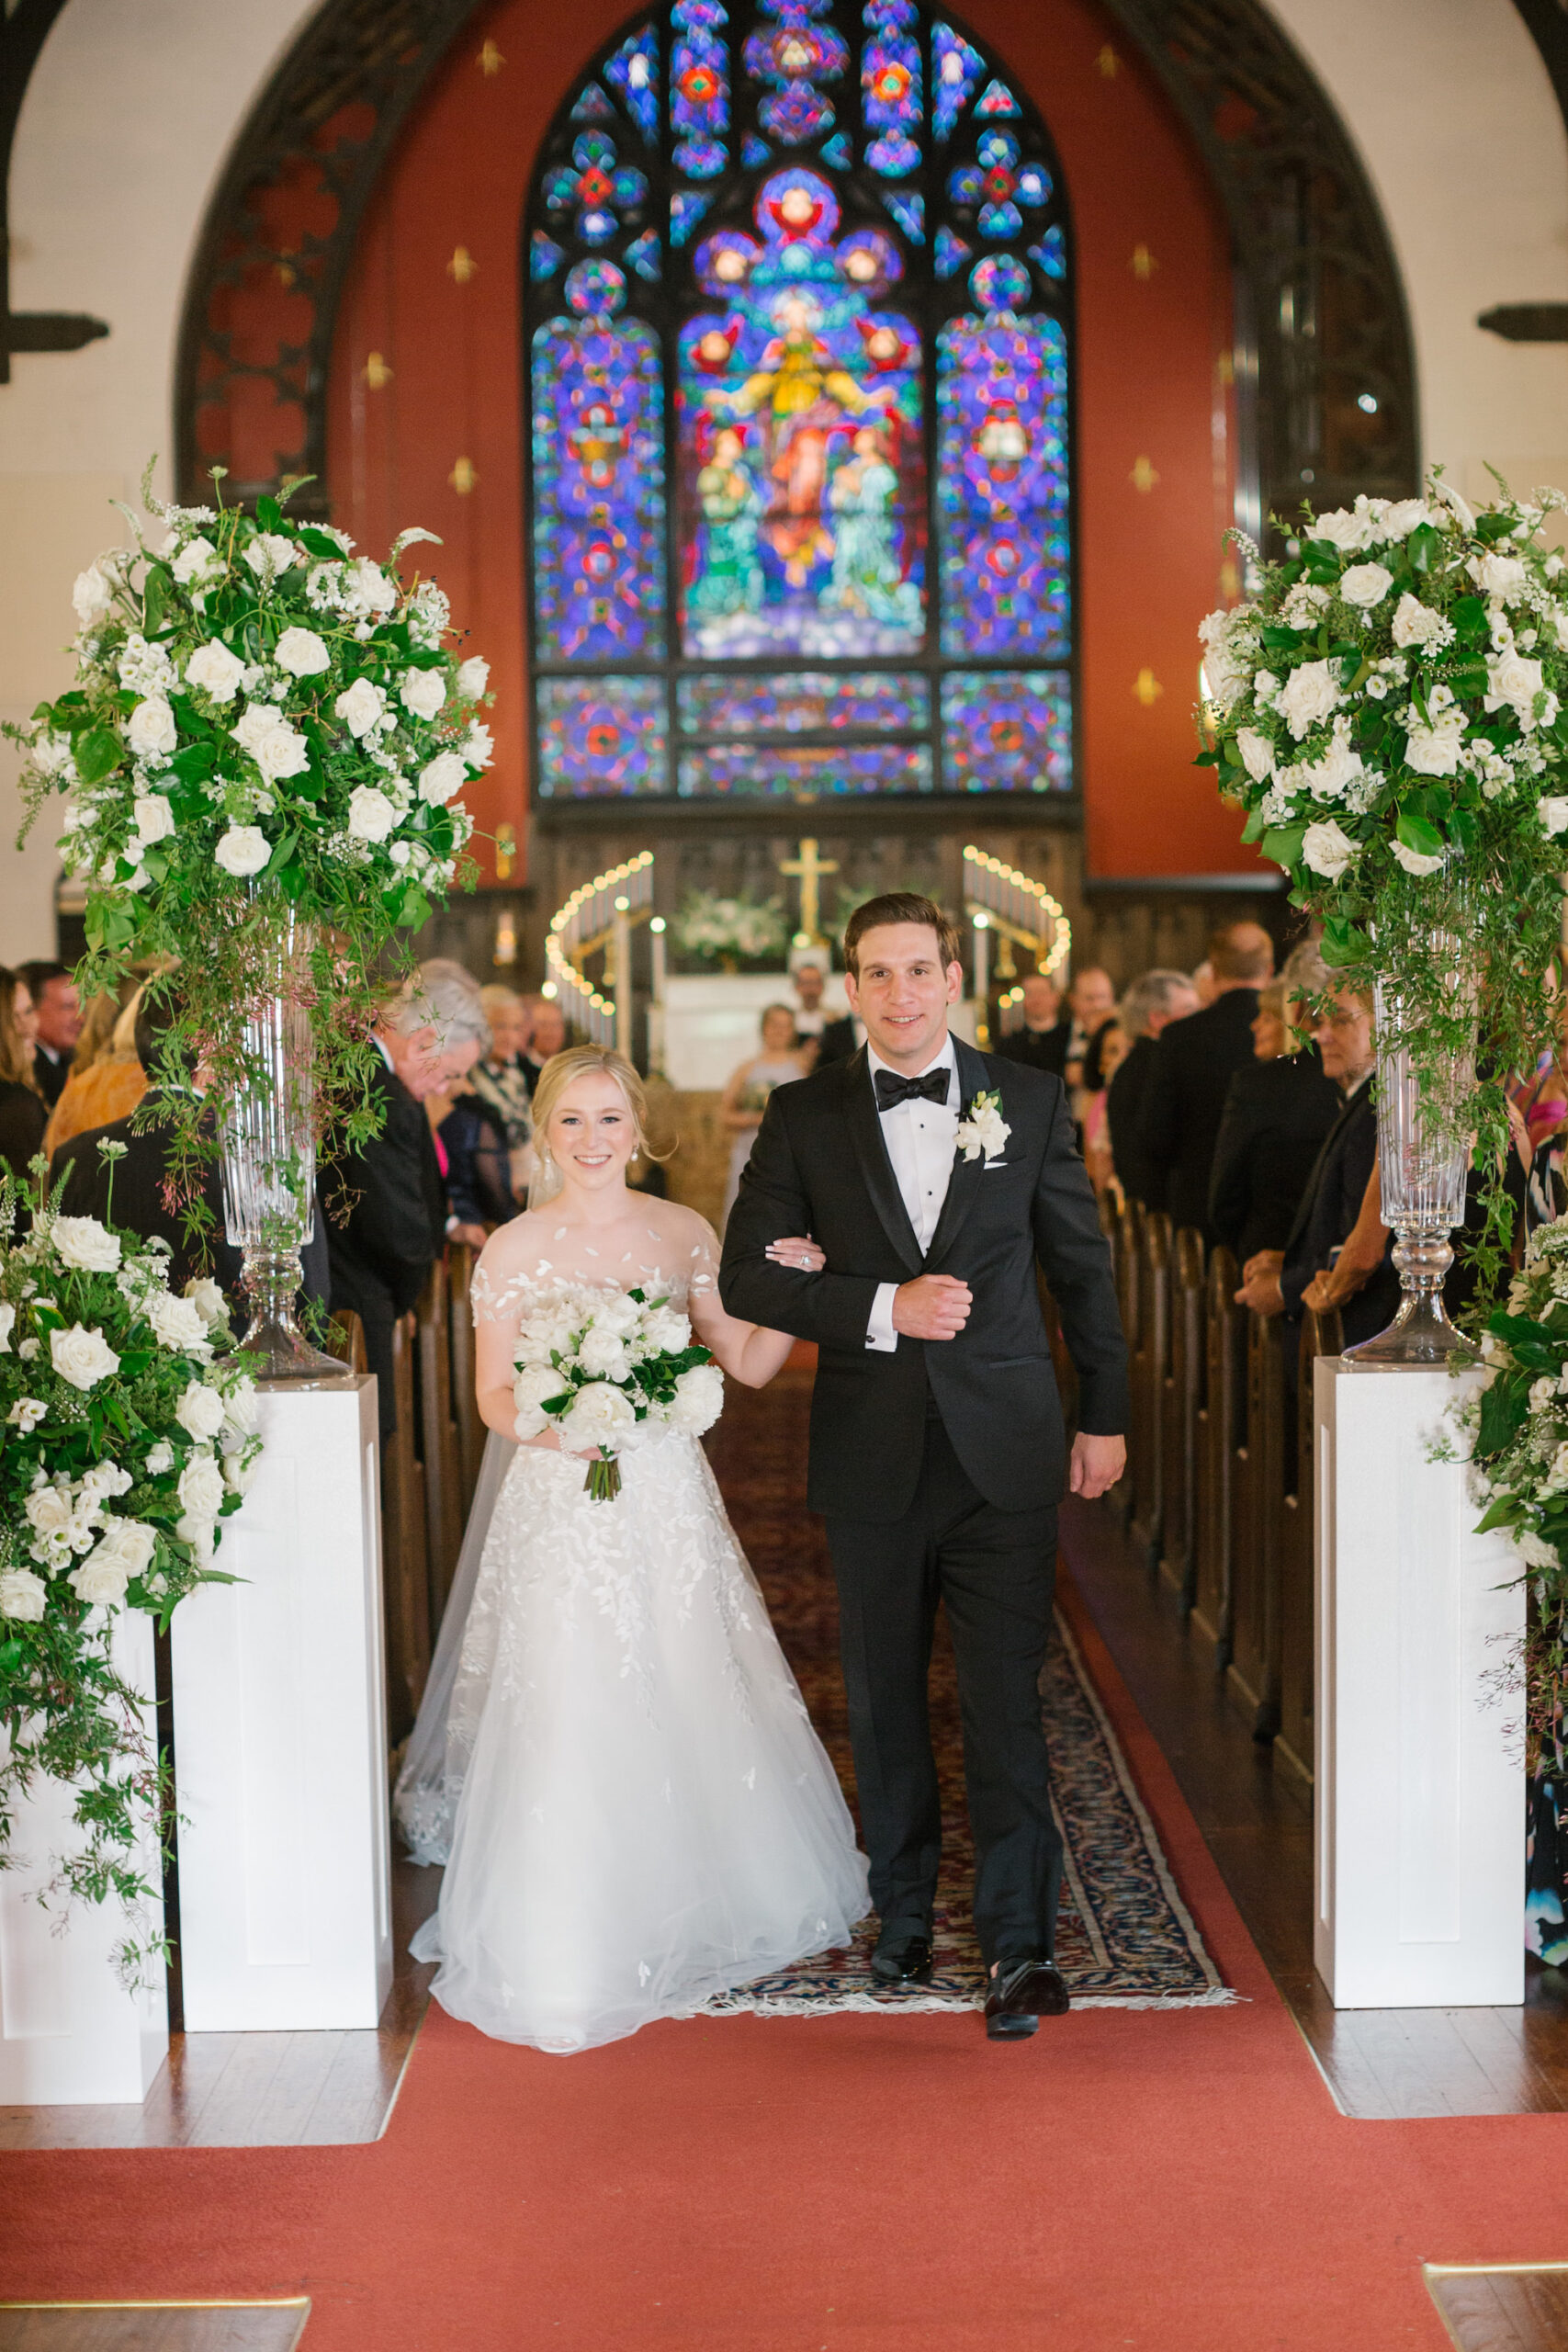 Bride and Groom Timeless Episcopal Church Wedding Ceremony | Tampa Bay Planner Parties A La Carte